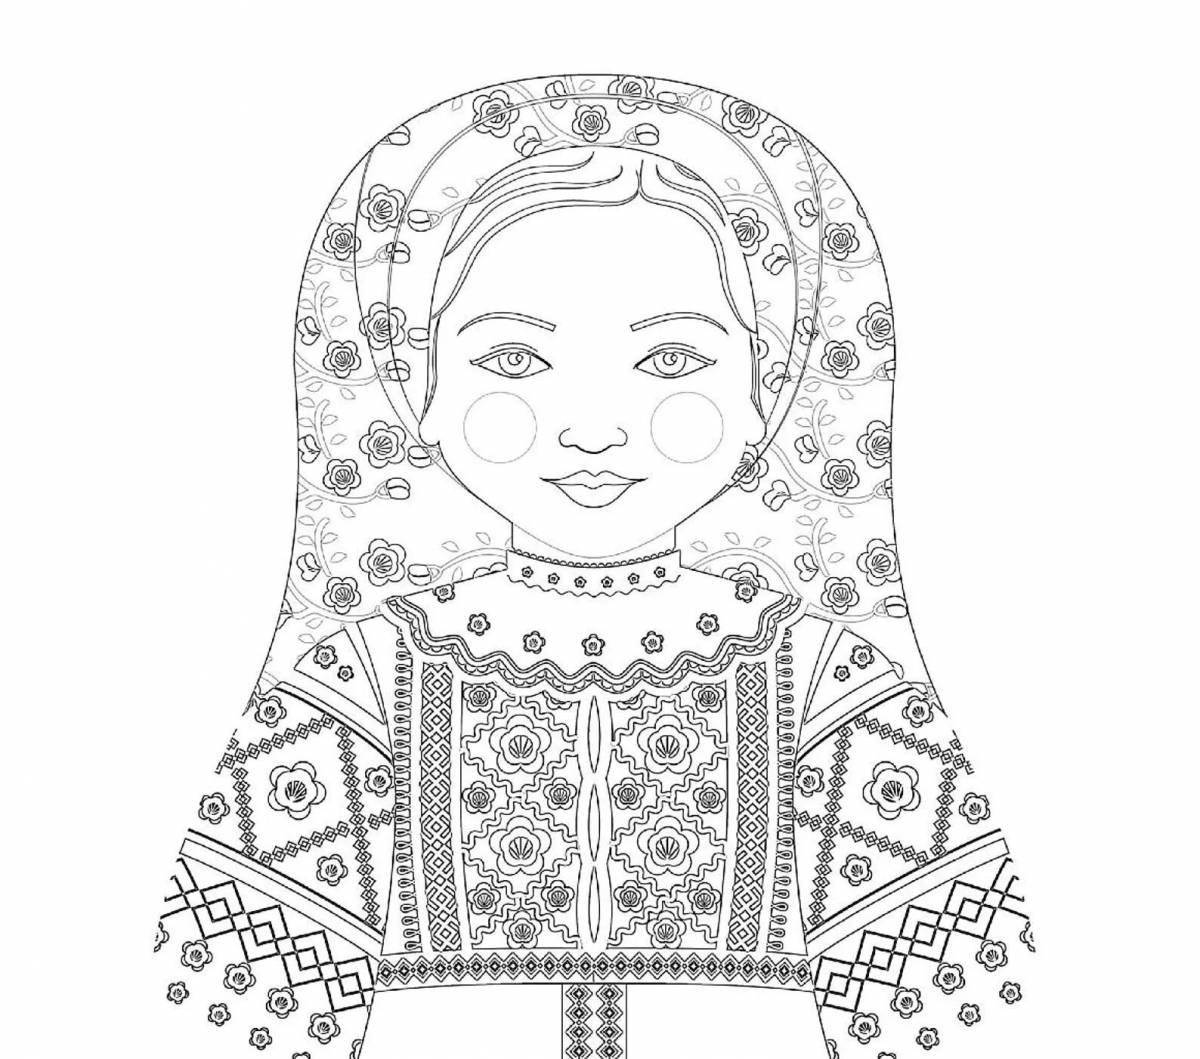 Coloring page nice belarusian doll